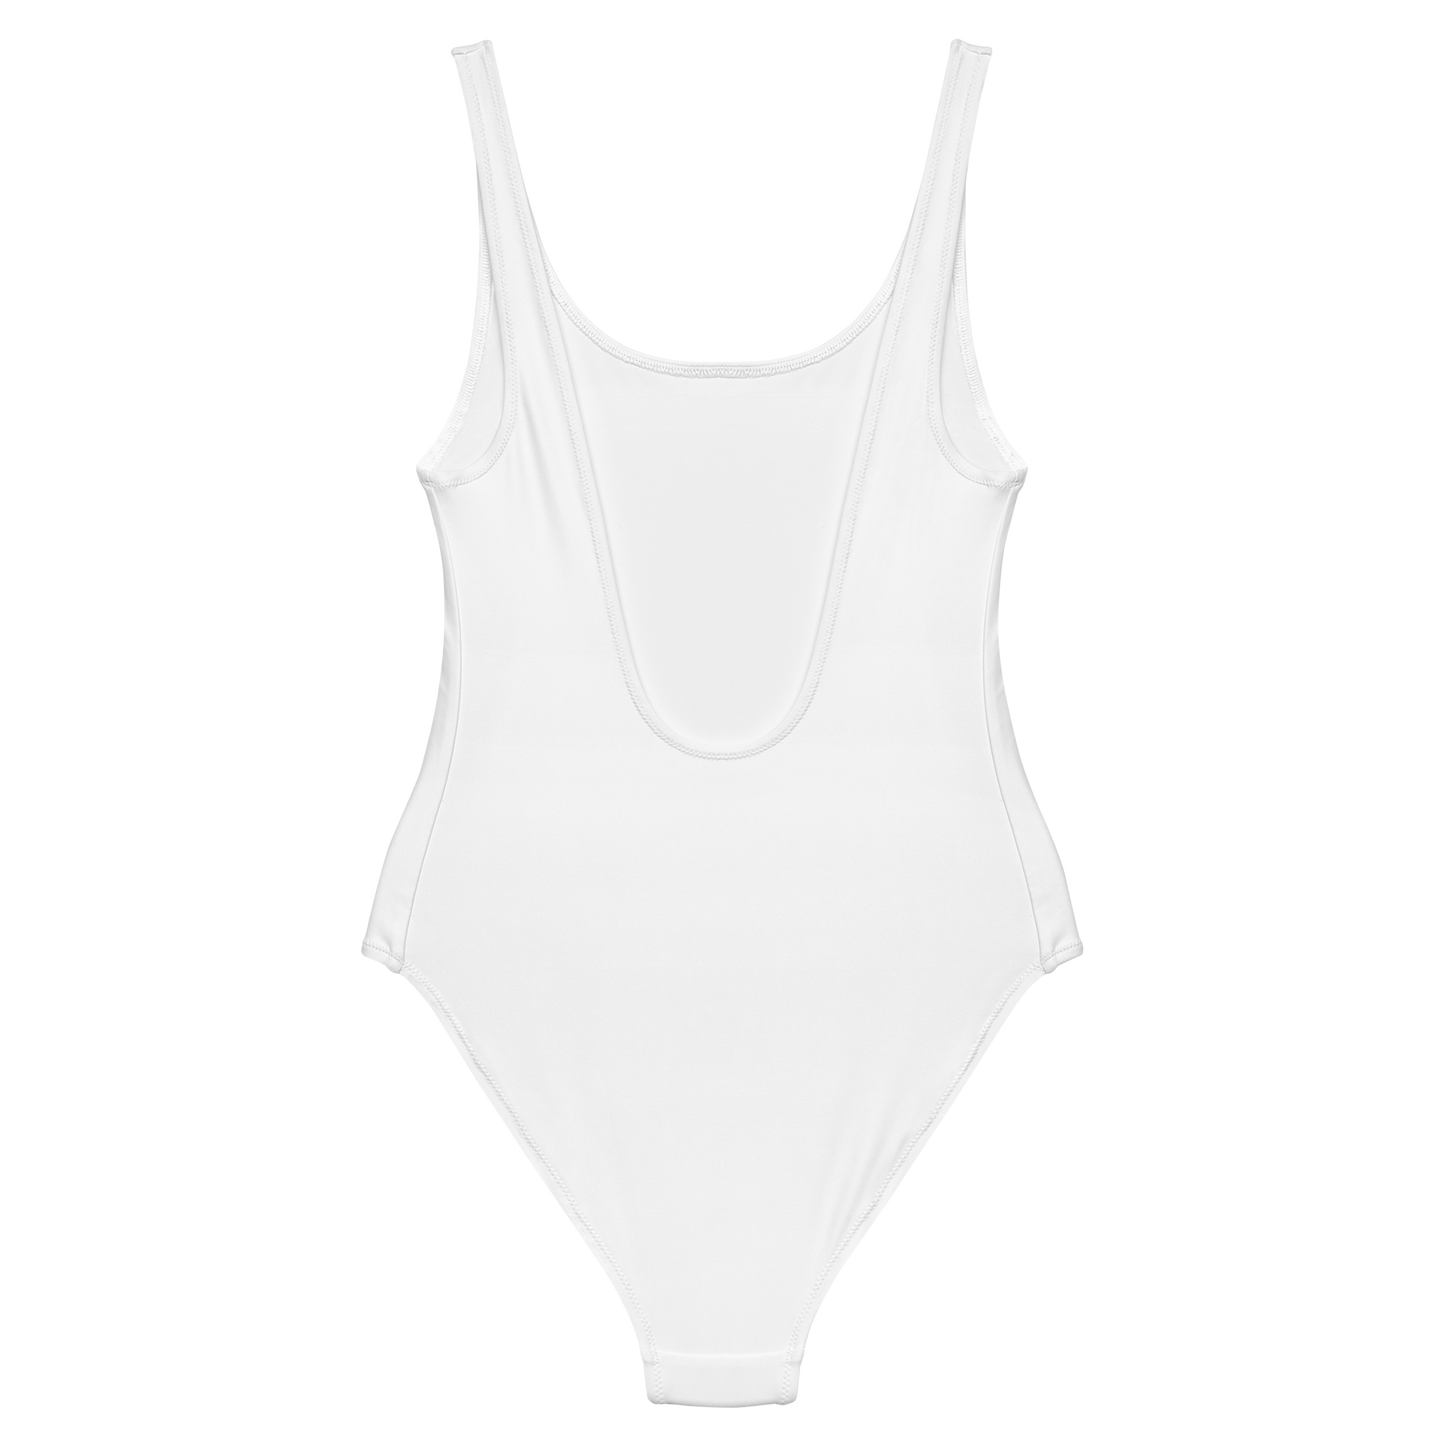 Great White One-Piece Swimsuit